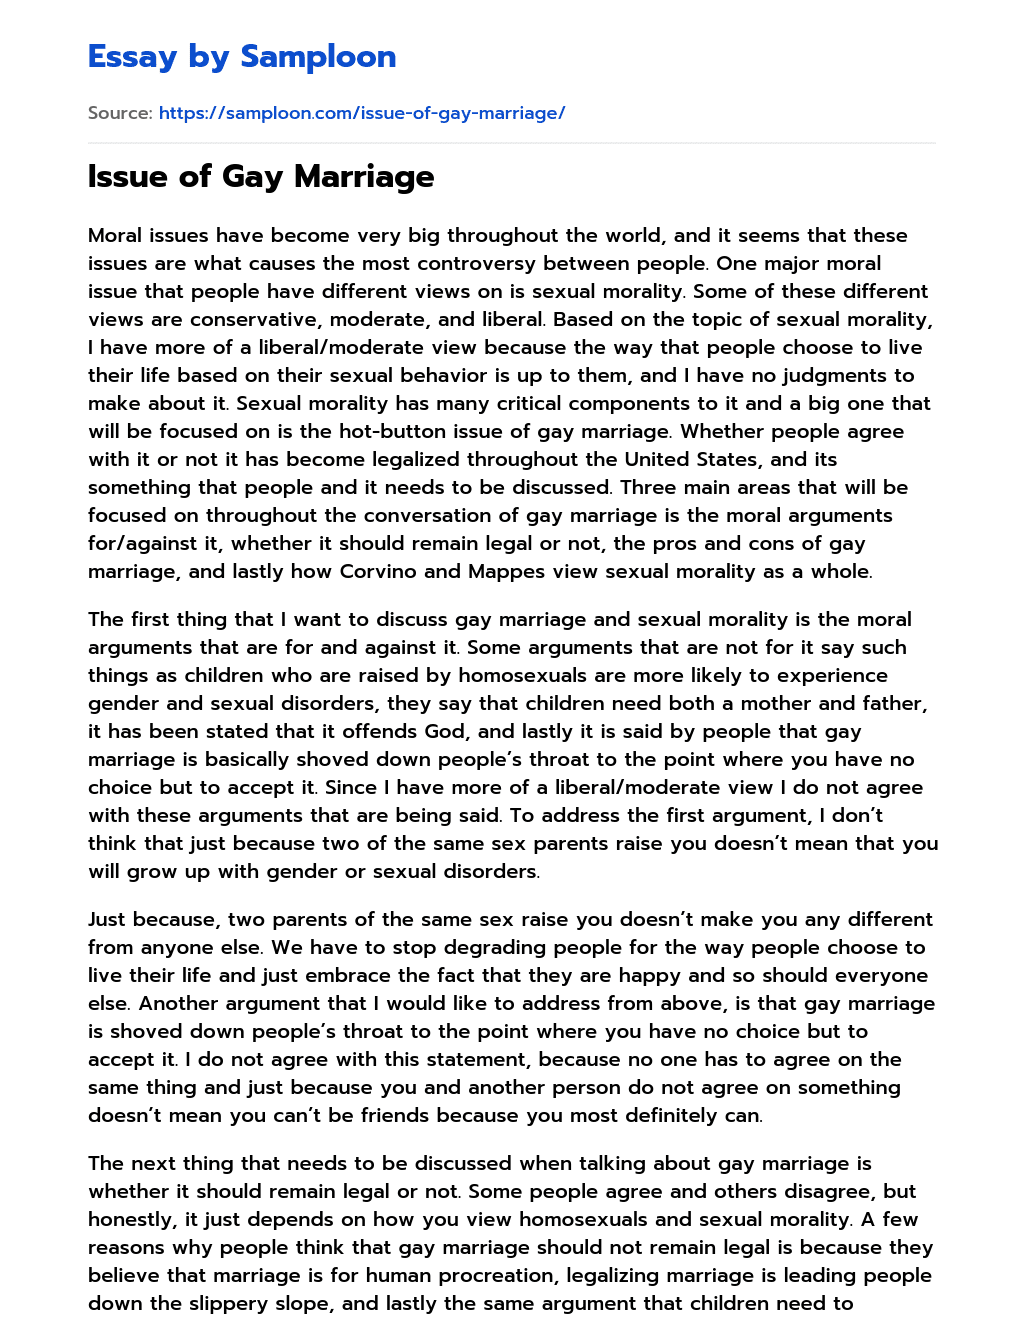 Issue of Gay Marriage essay